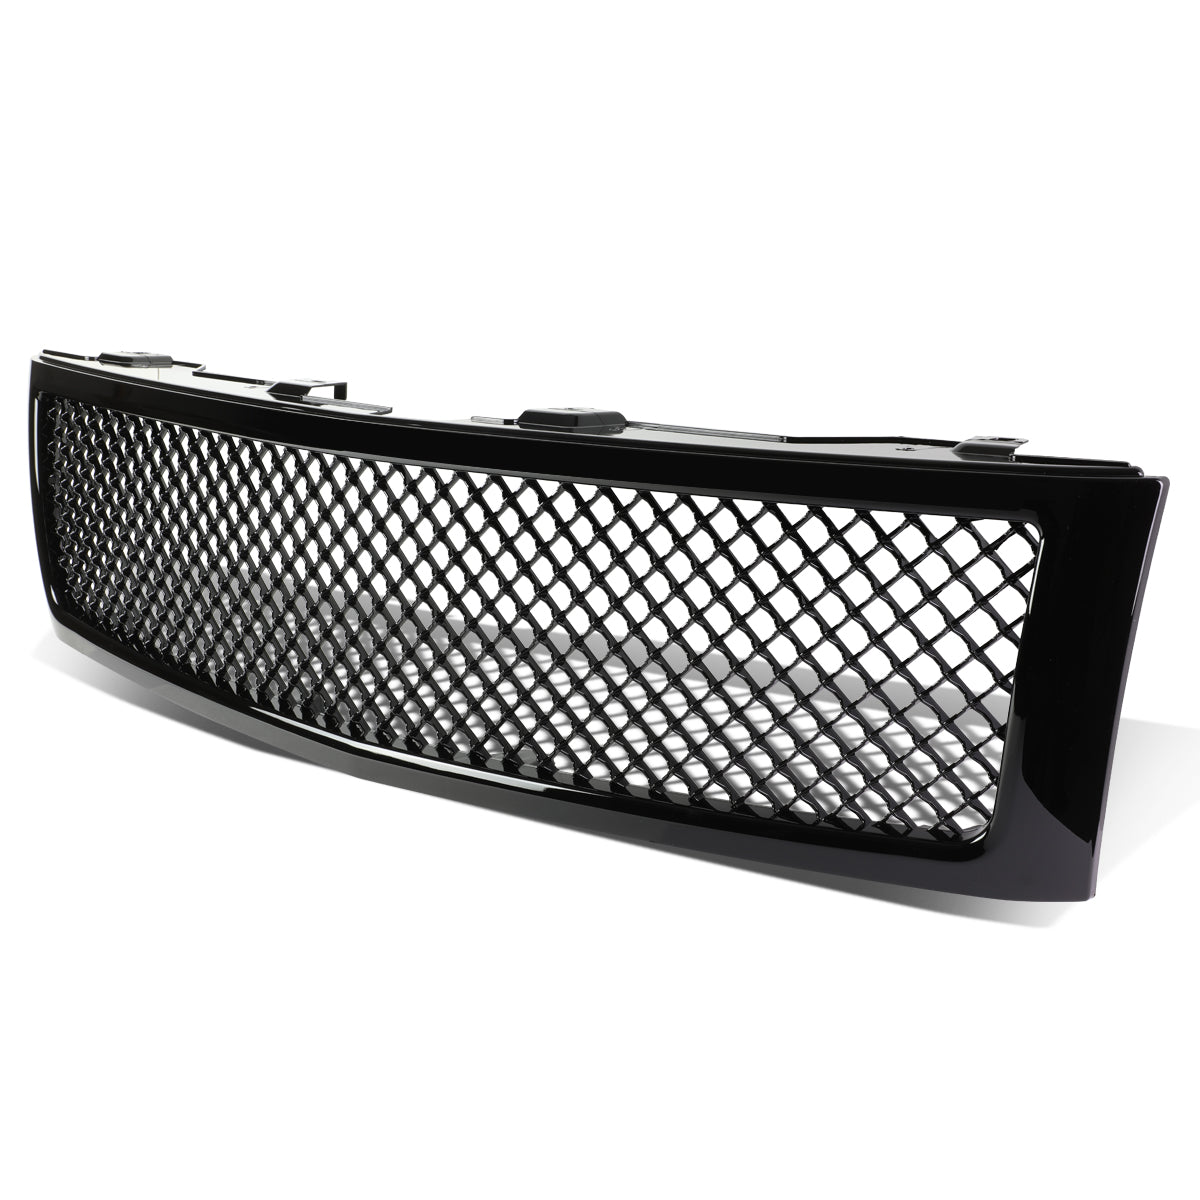 07-13 Chevy Silverado 1500 Front Grille - Badgeless Polished Black